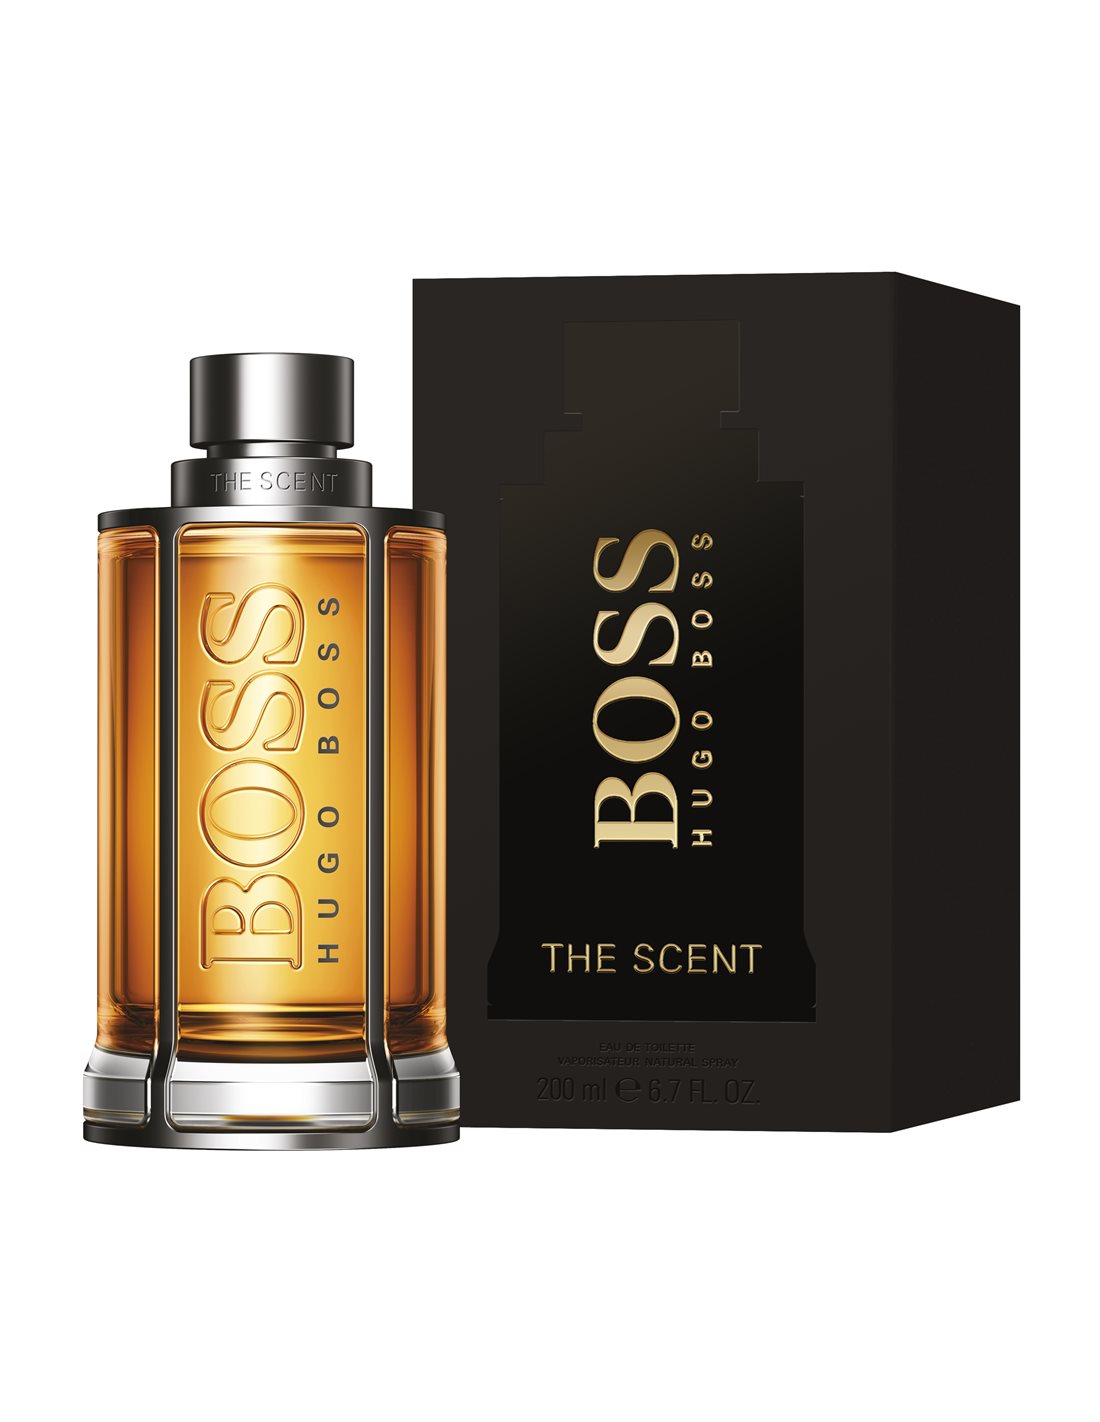 BOSS THE SCENT 200 ML EDT GAL